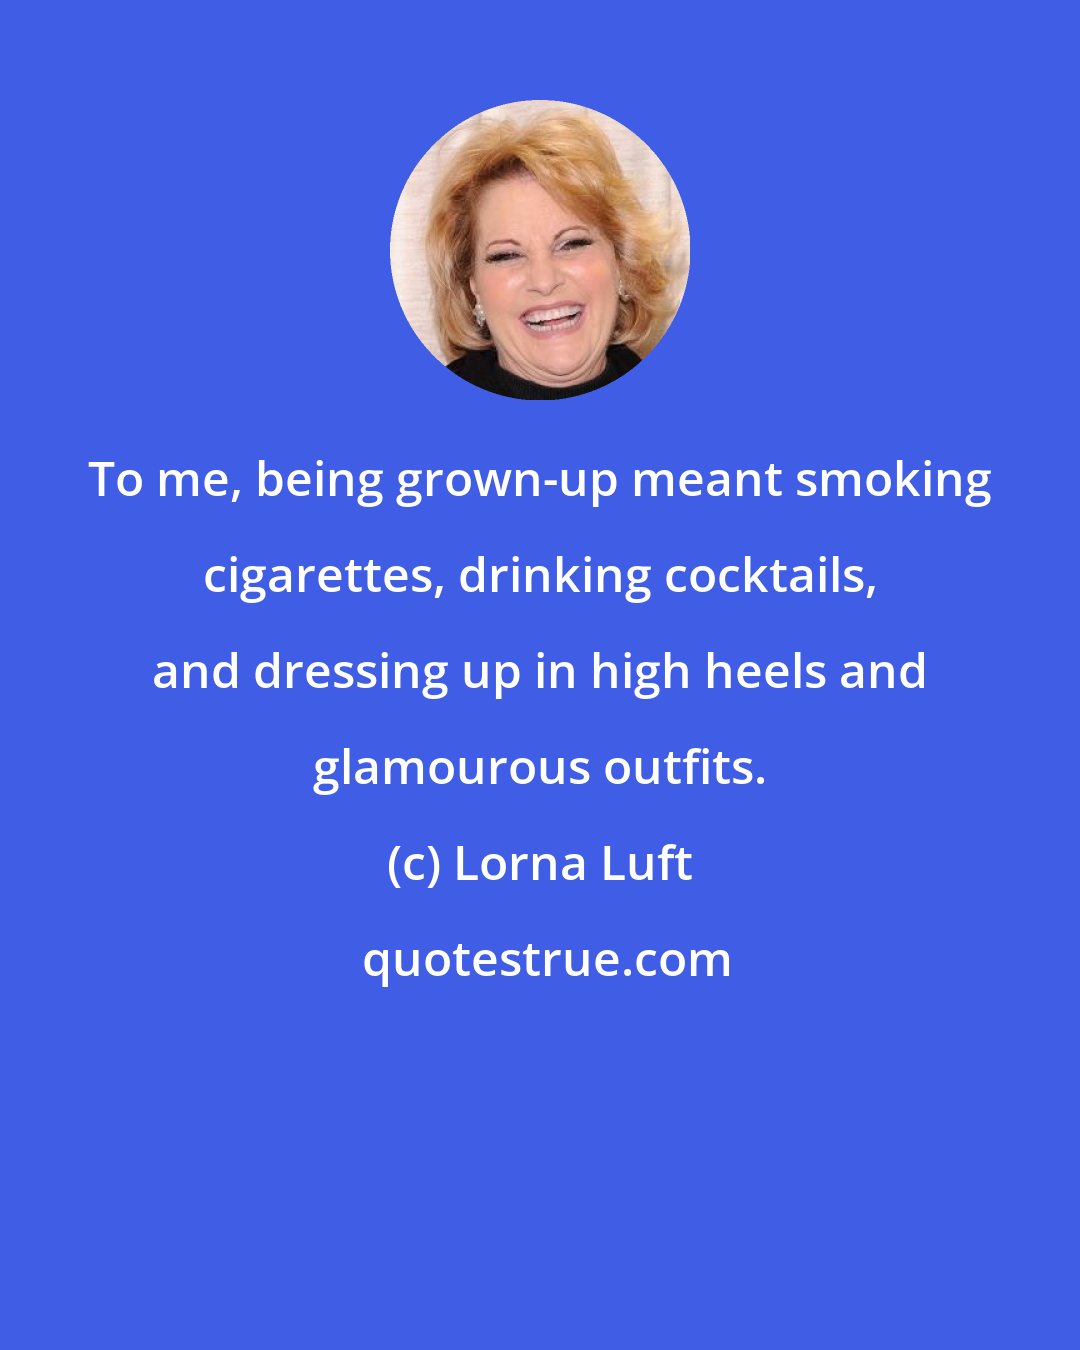 Lorna Luft: To me, being grown-up meant smoking cigarettes, drinking cocktails, and dressing up in high heels and glamourous outfits.